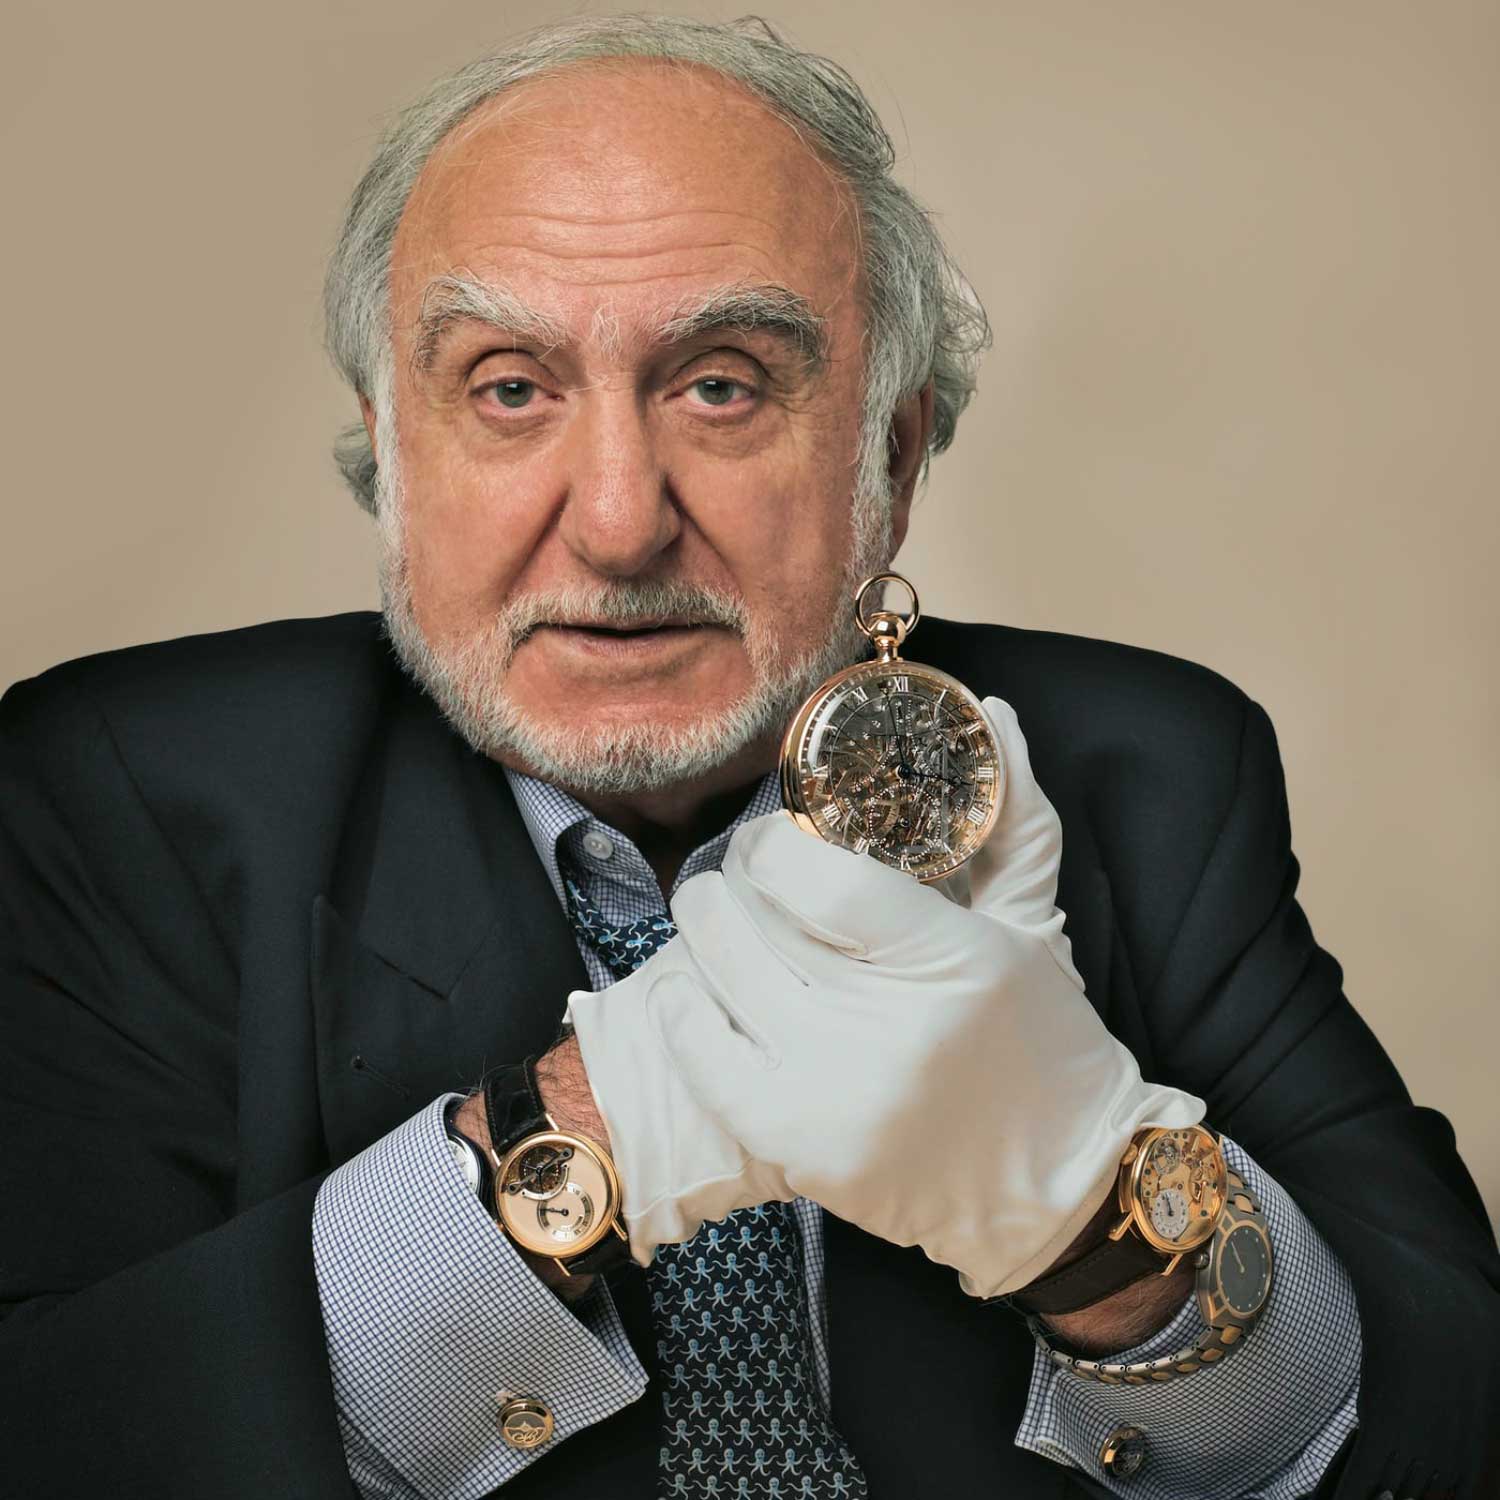 Nicolas Hayek, regarded by many as the savior of the Swiss watch industry